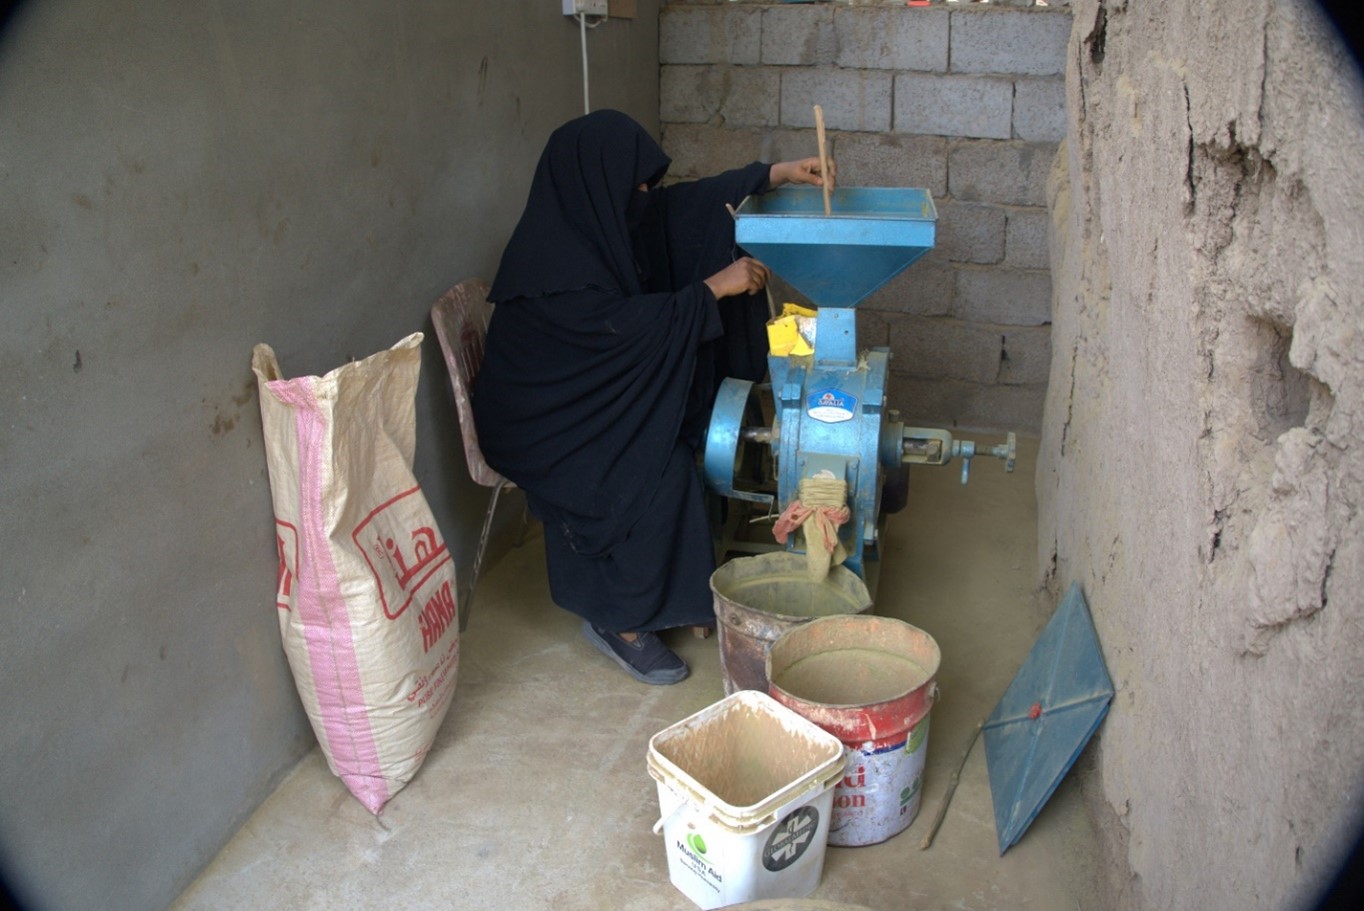 A muslim woman with a black outfit working on a grinding machine